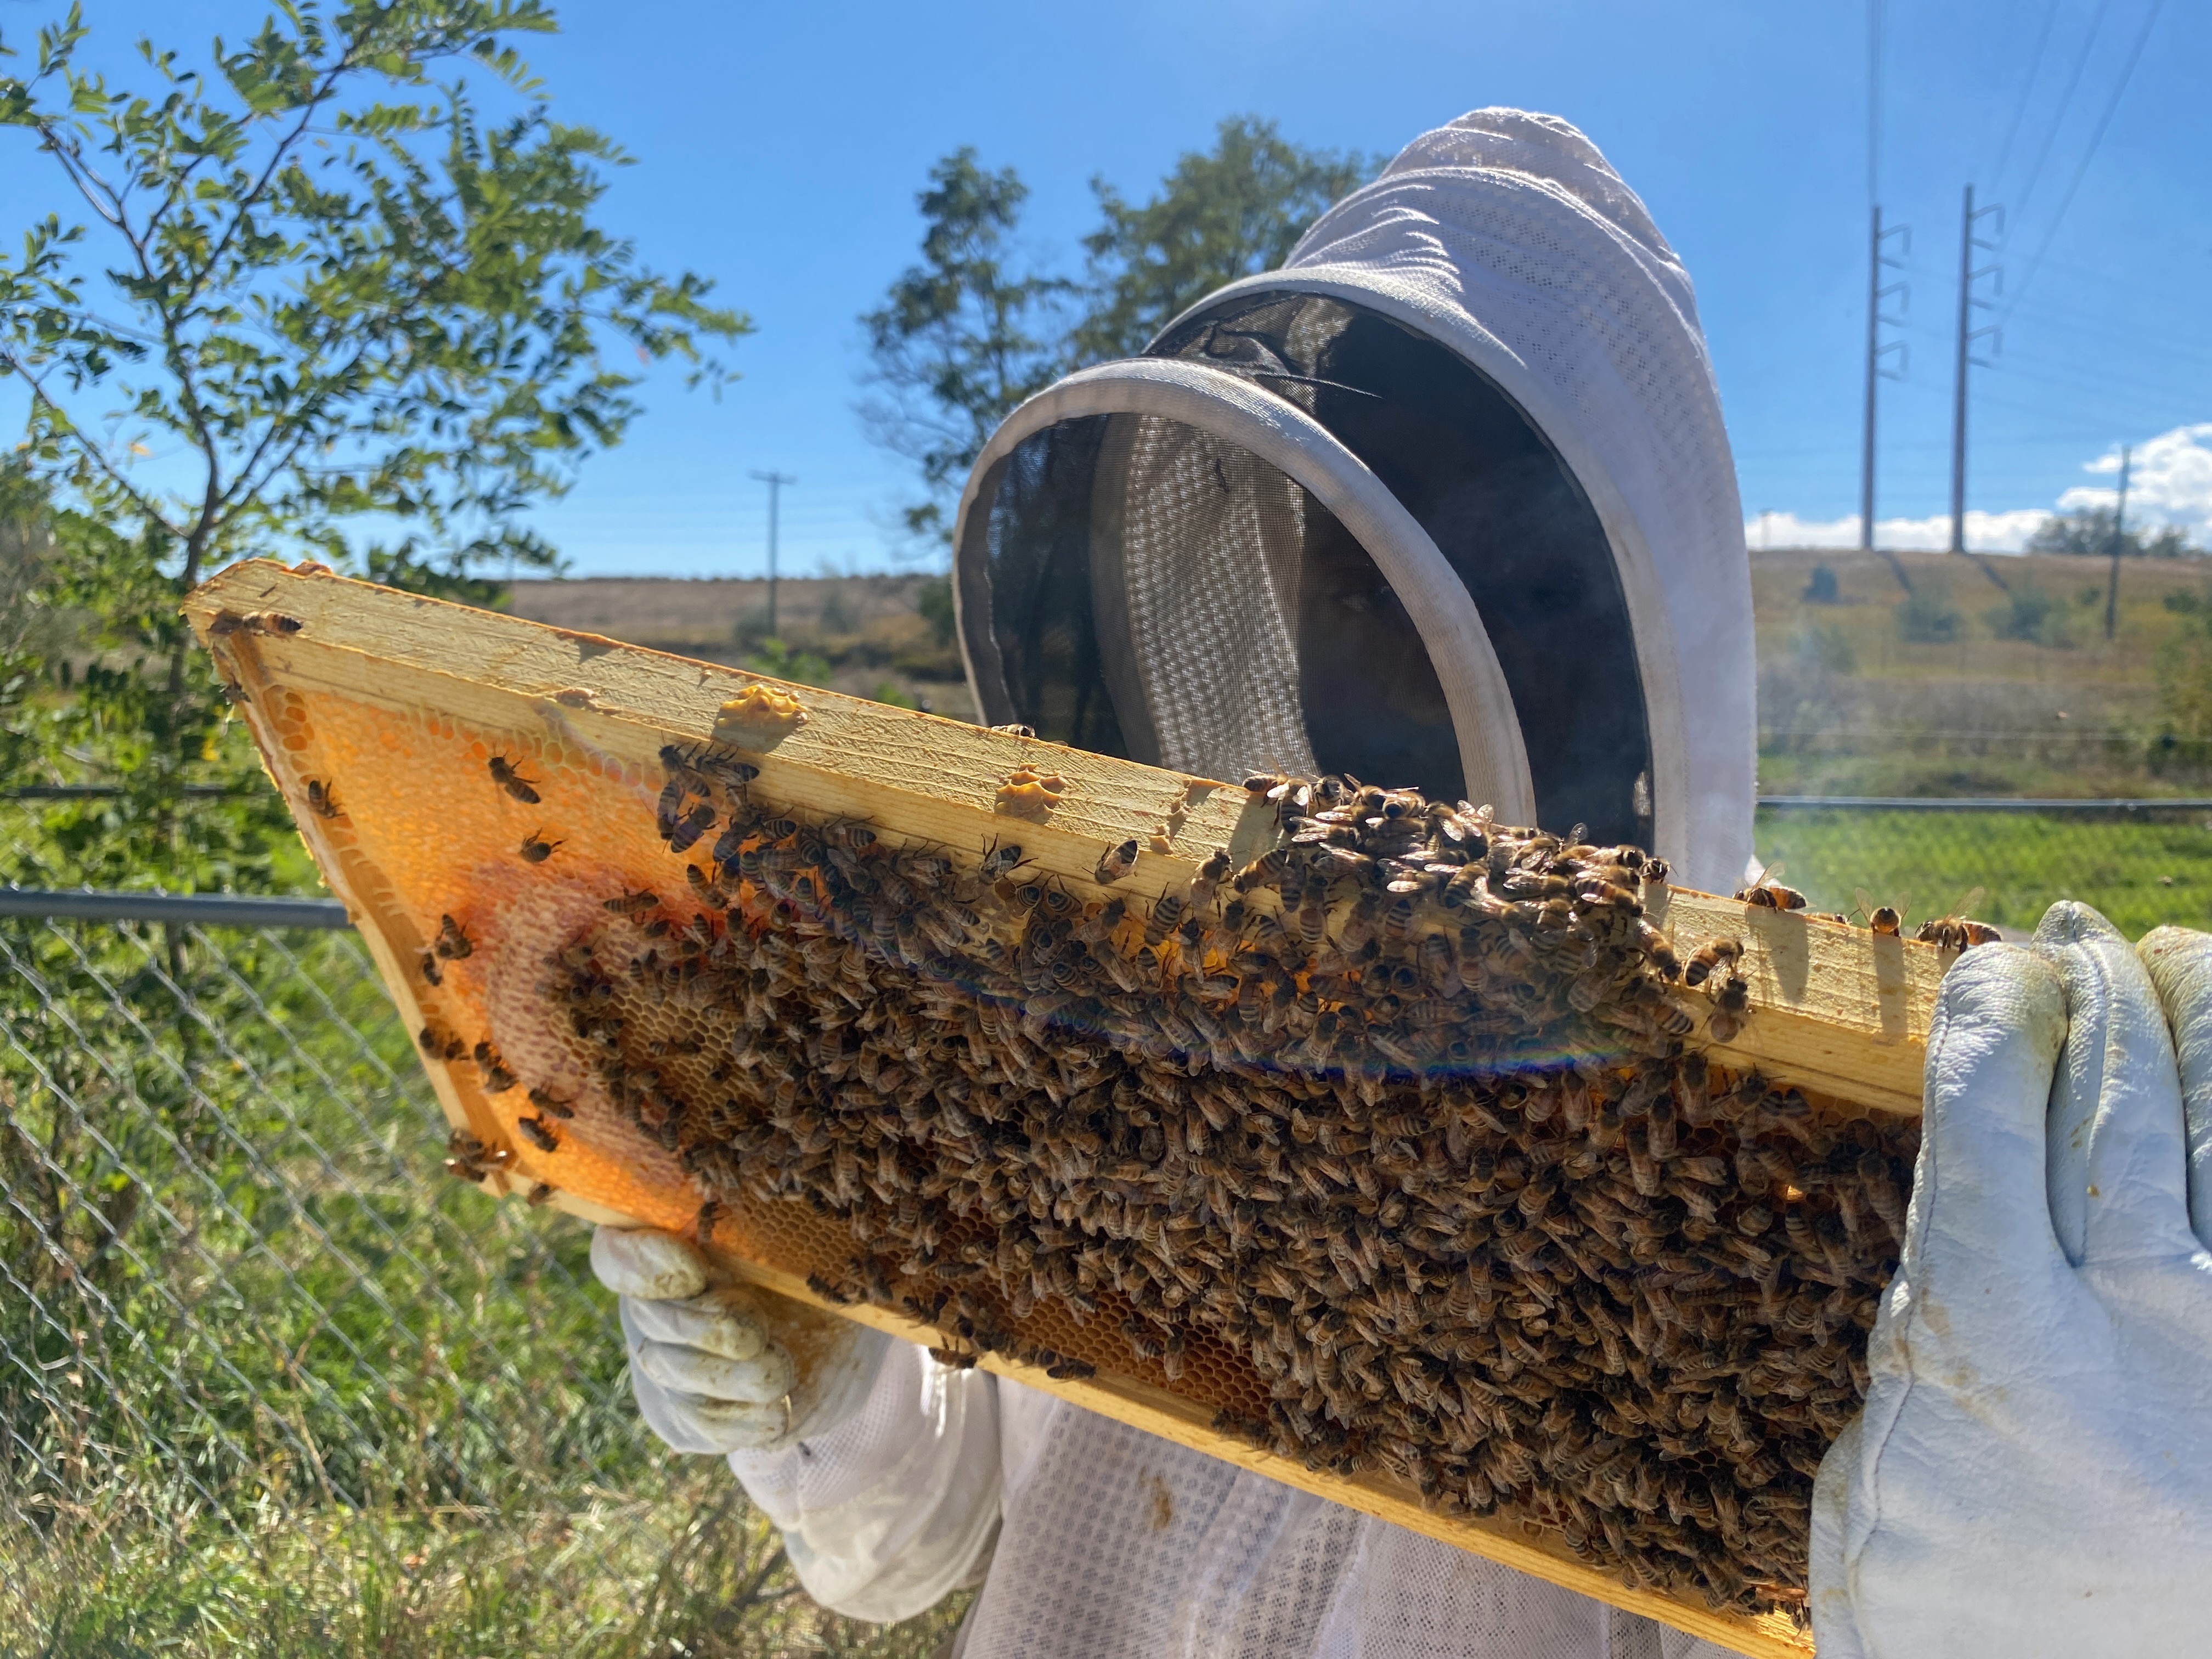 A person wearing a bee suit holding a honeycomb covered in bees, looking at its surface.